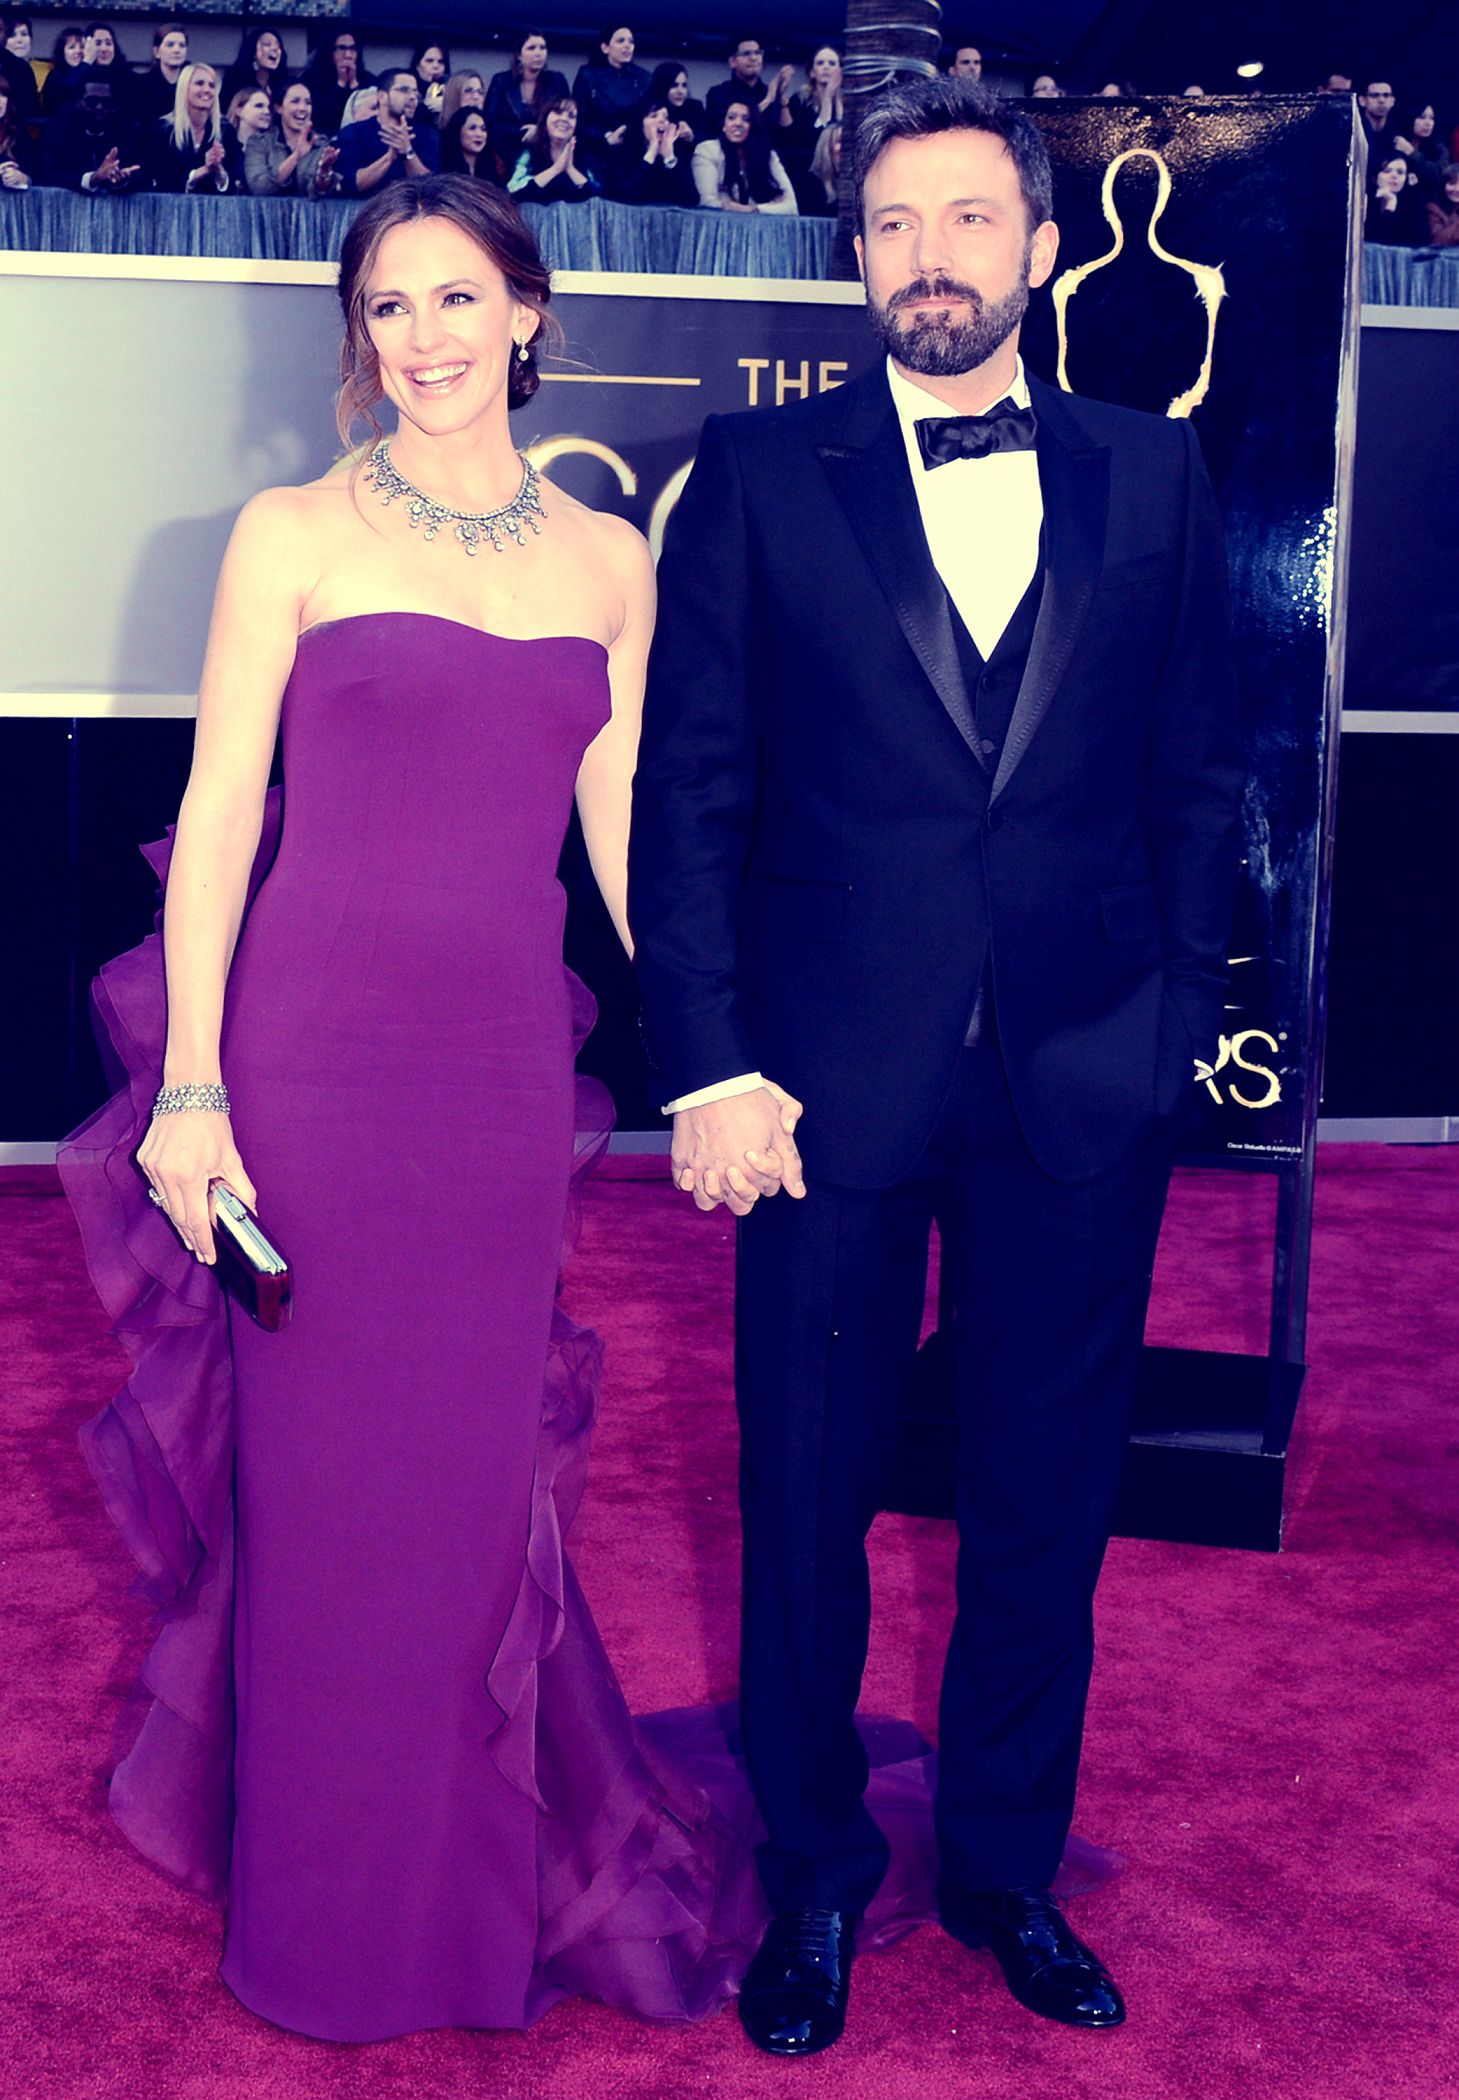 Jennifer Garner & Ben Affleck at the 85th Annual Academy Awards (Photo courtesy | Gucci/Getty Images)